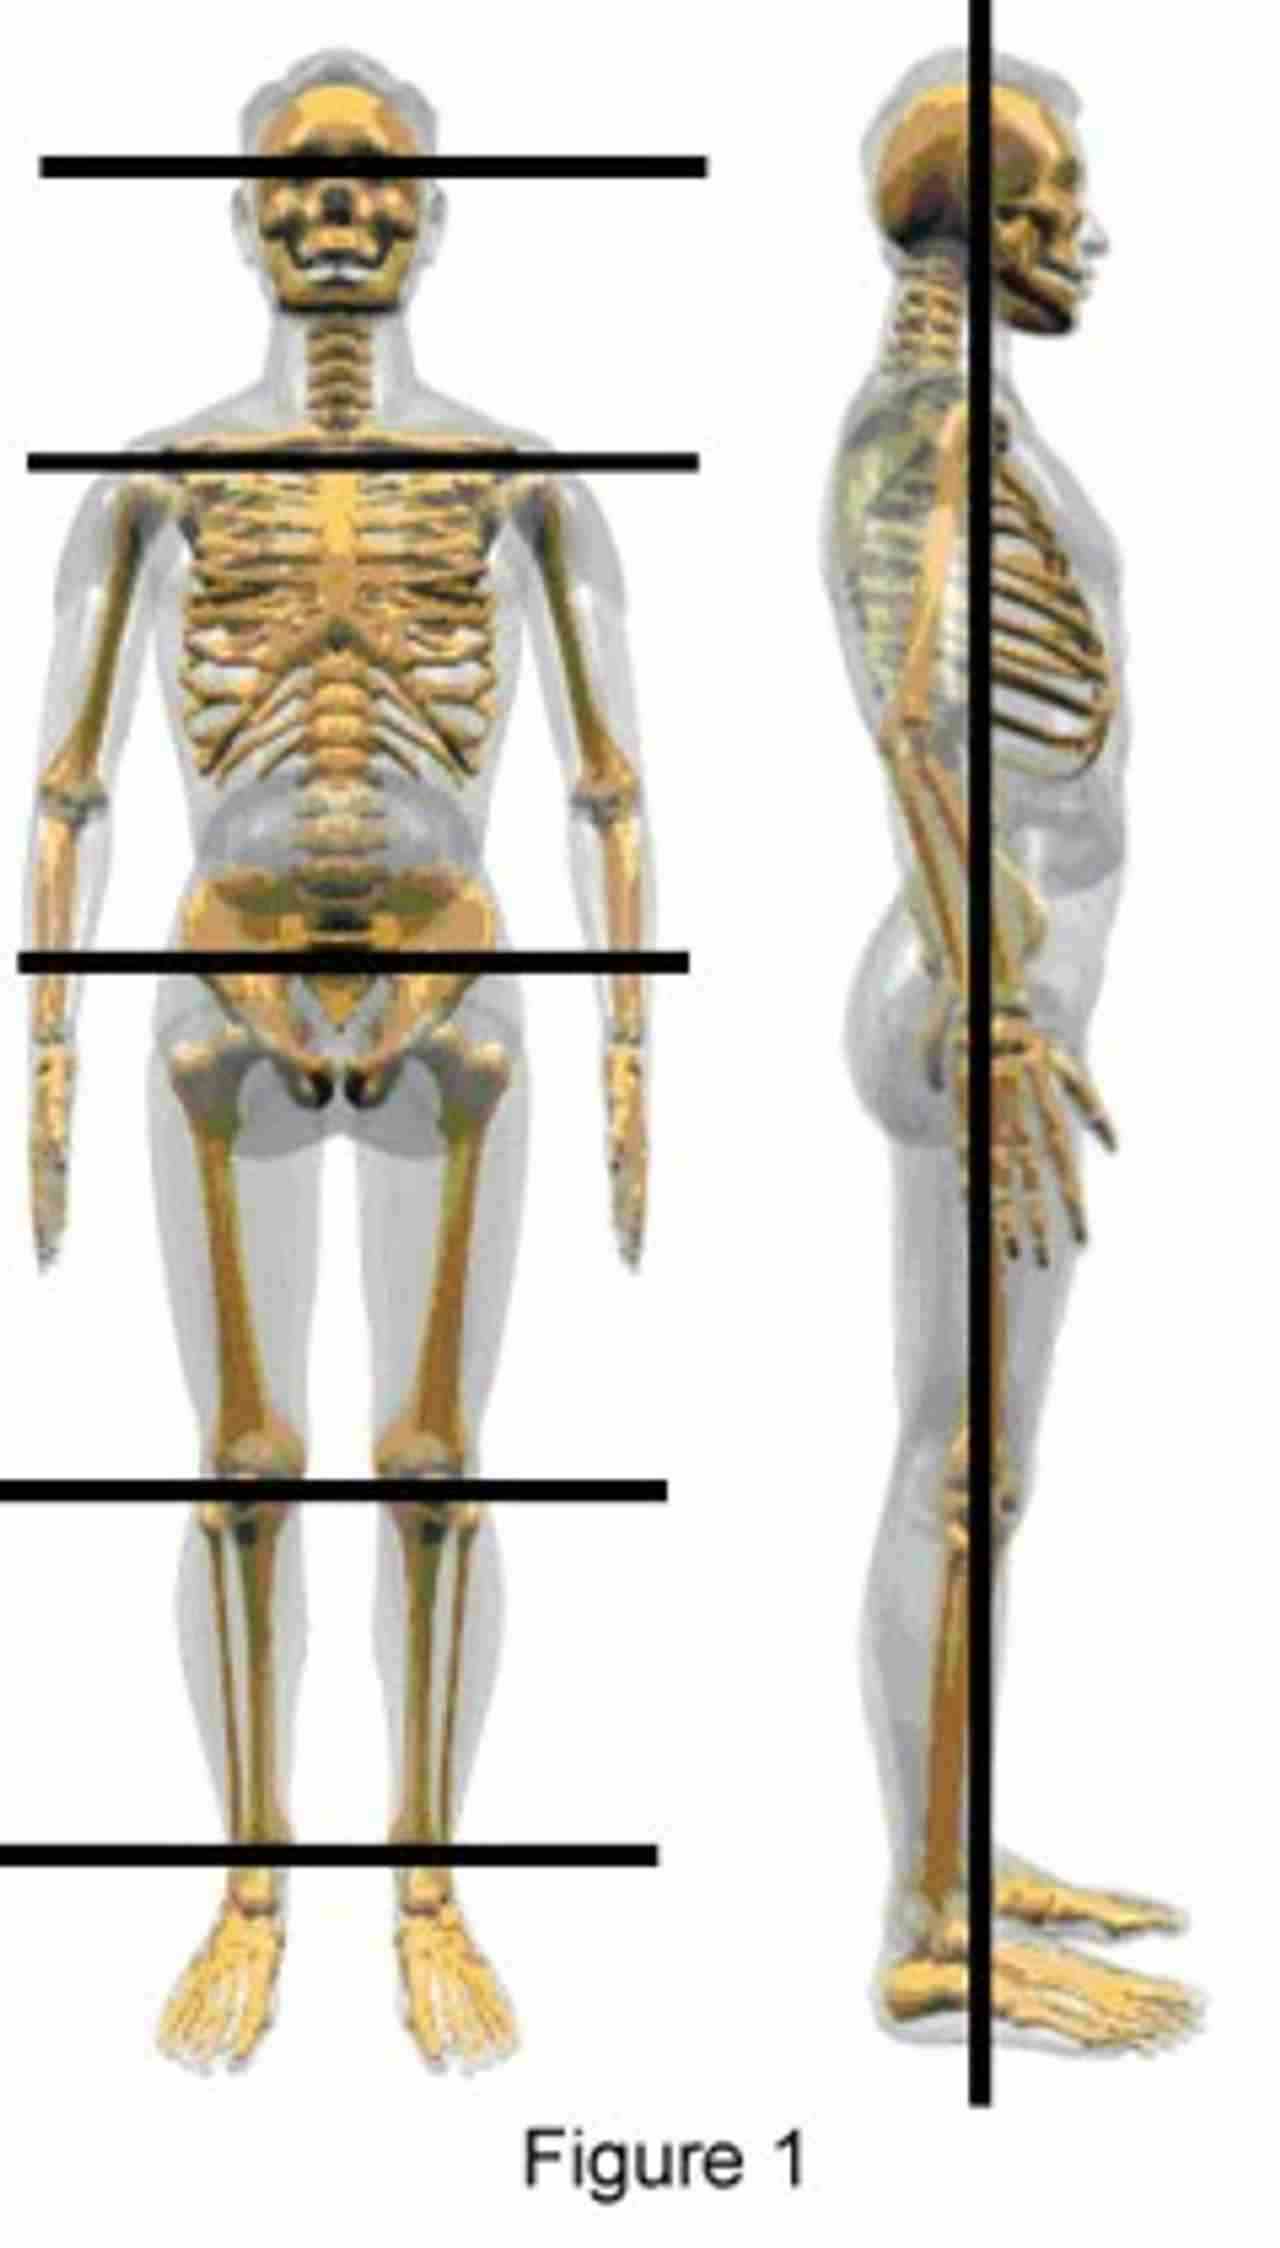 Two different views of the skeletal system in an anatomical position